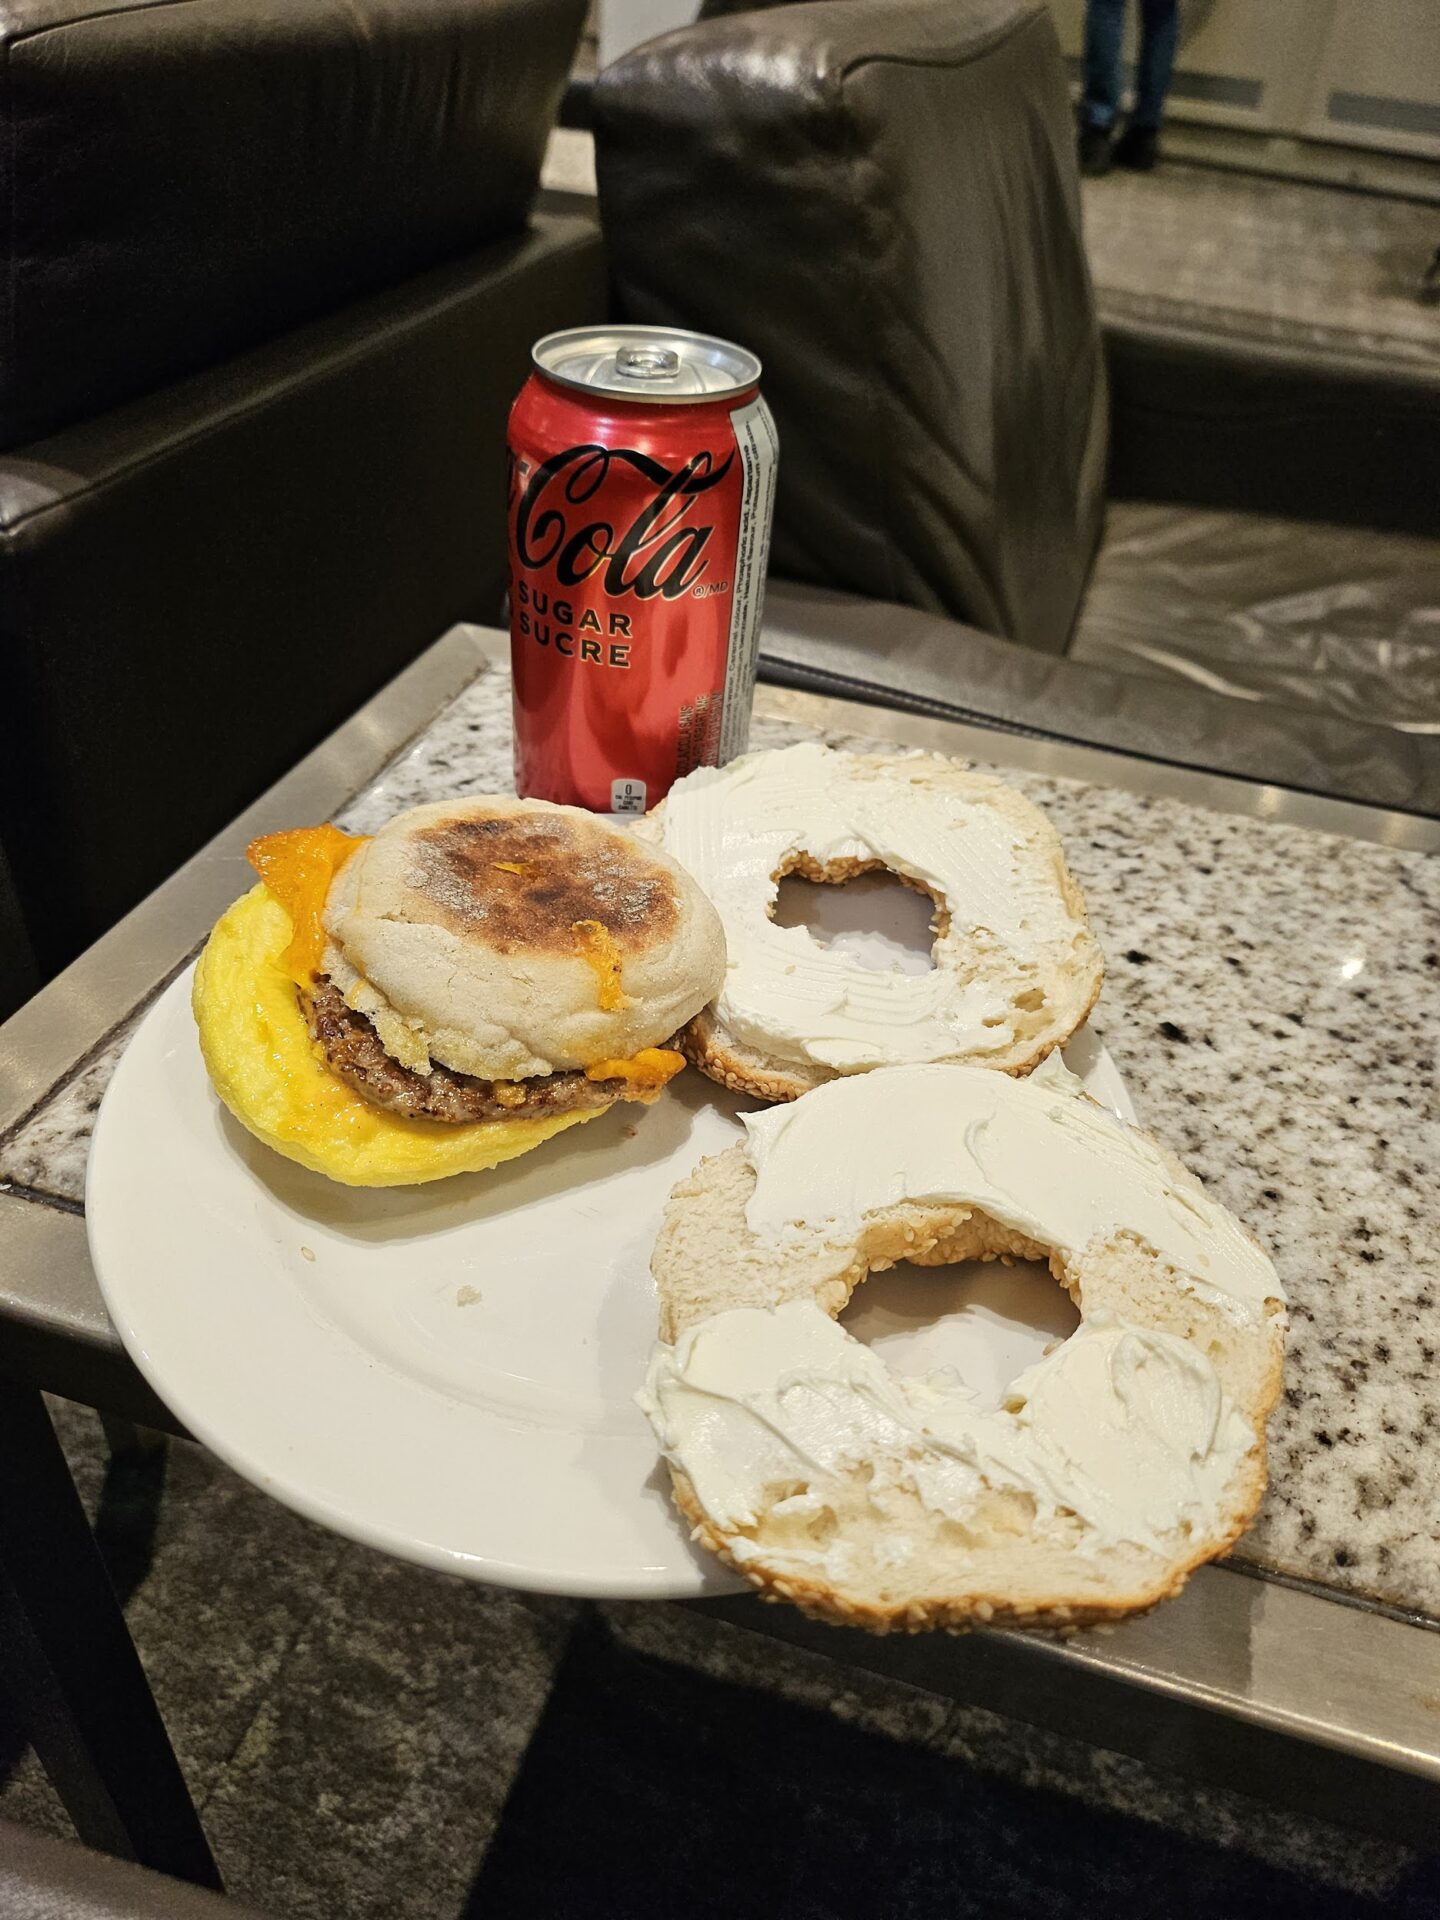 a bagel sandwich and a soda can on a table